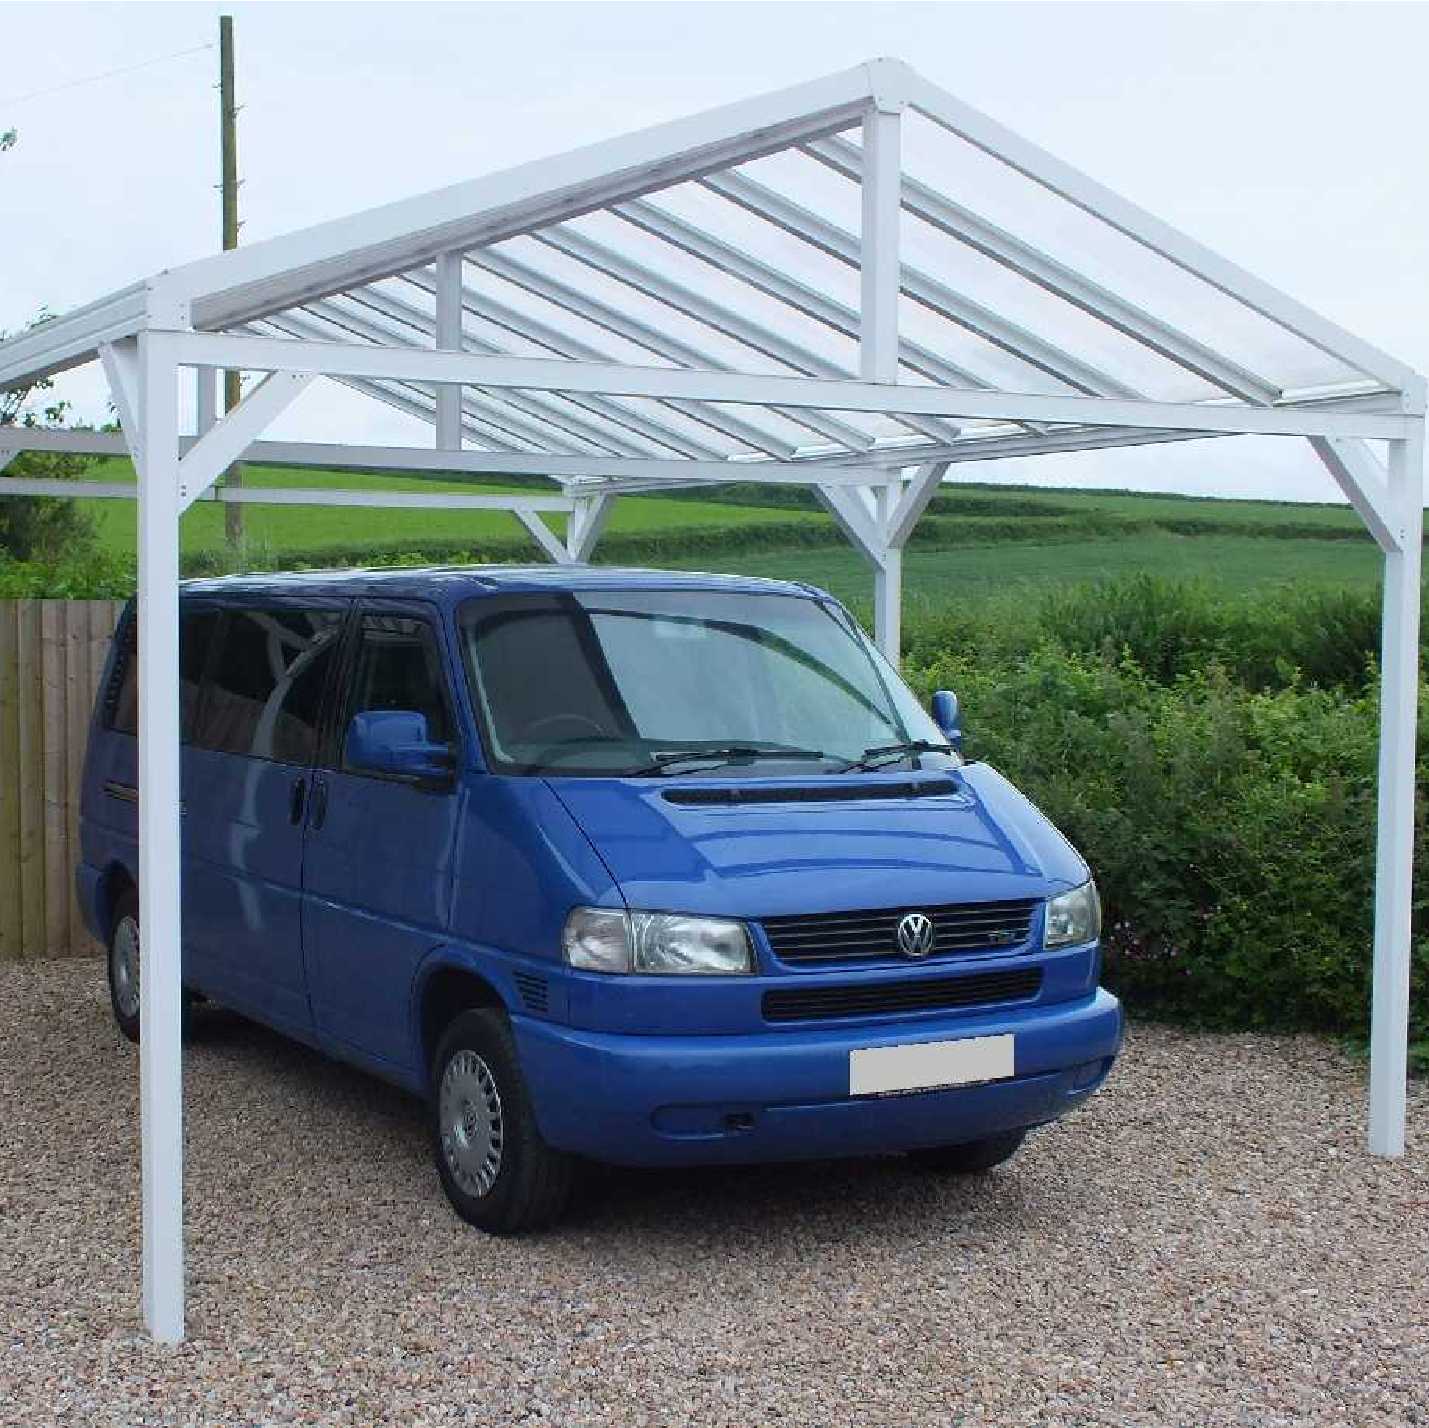 Omega Smart Free-Standing, White Gable-Roof (type 1) Canopy with 16mm Polycarbonate Glazing - 4.2m (W) x 3.5m (P), (6) Supporting Posts